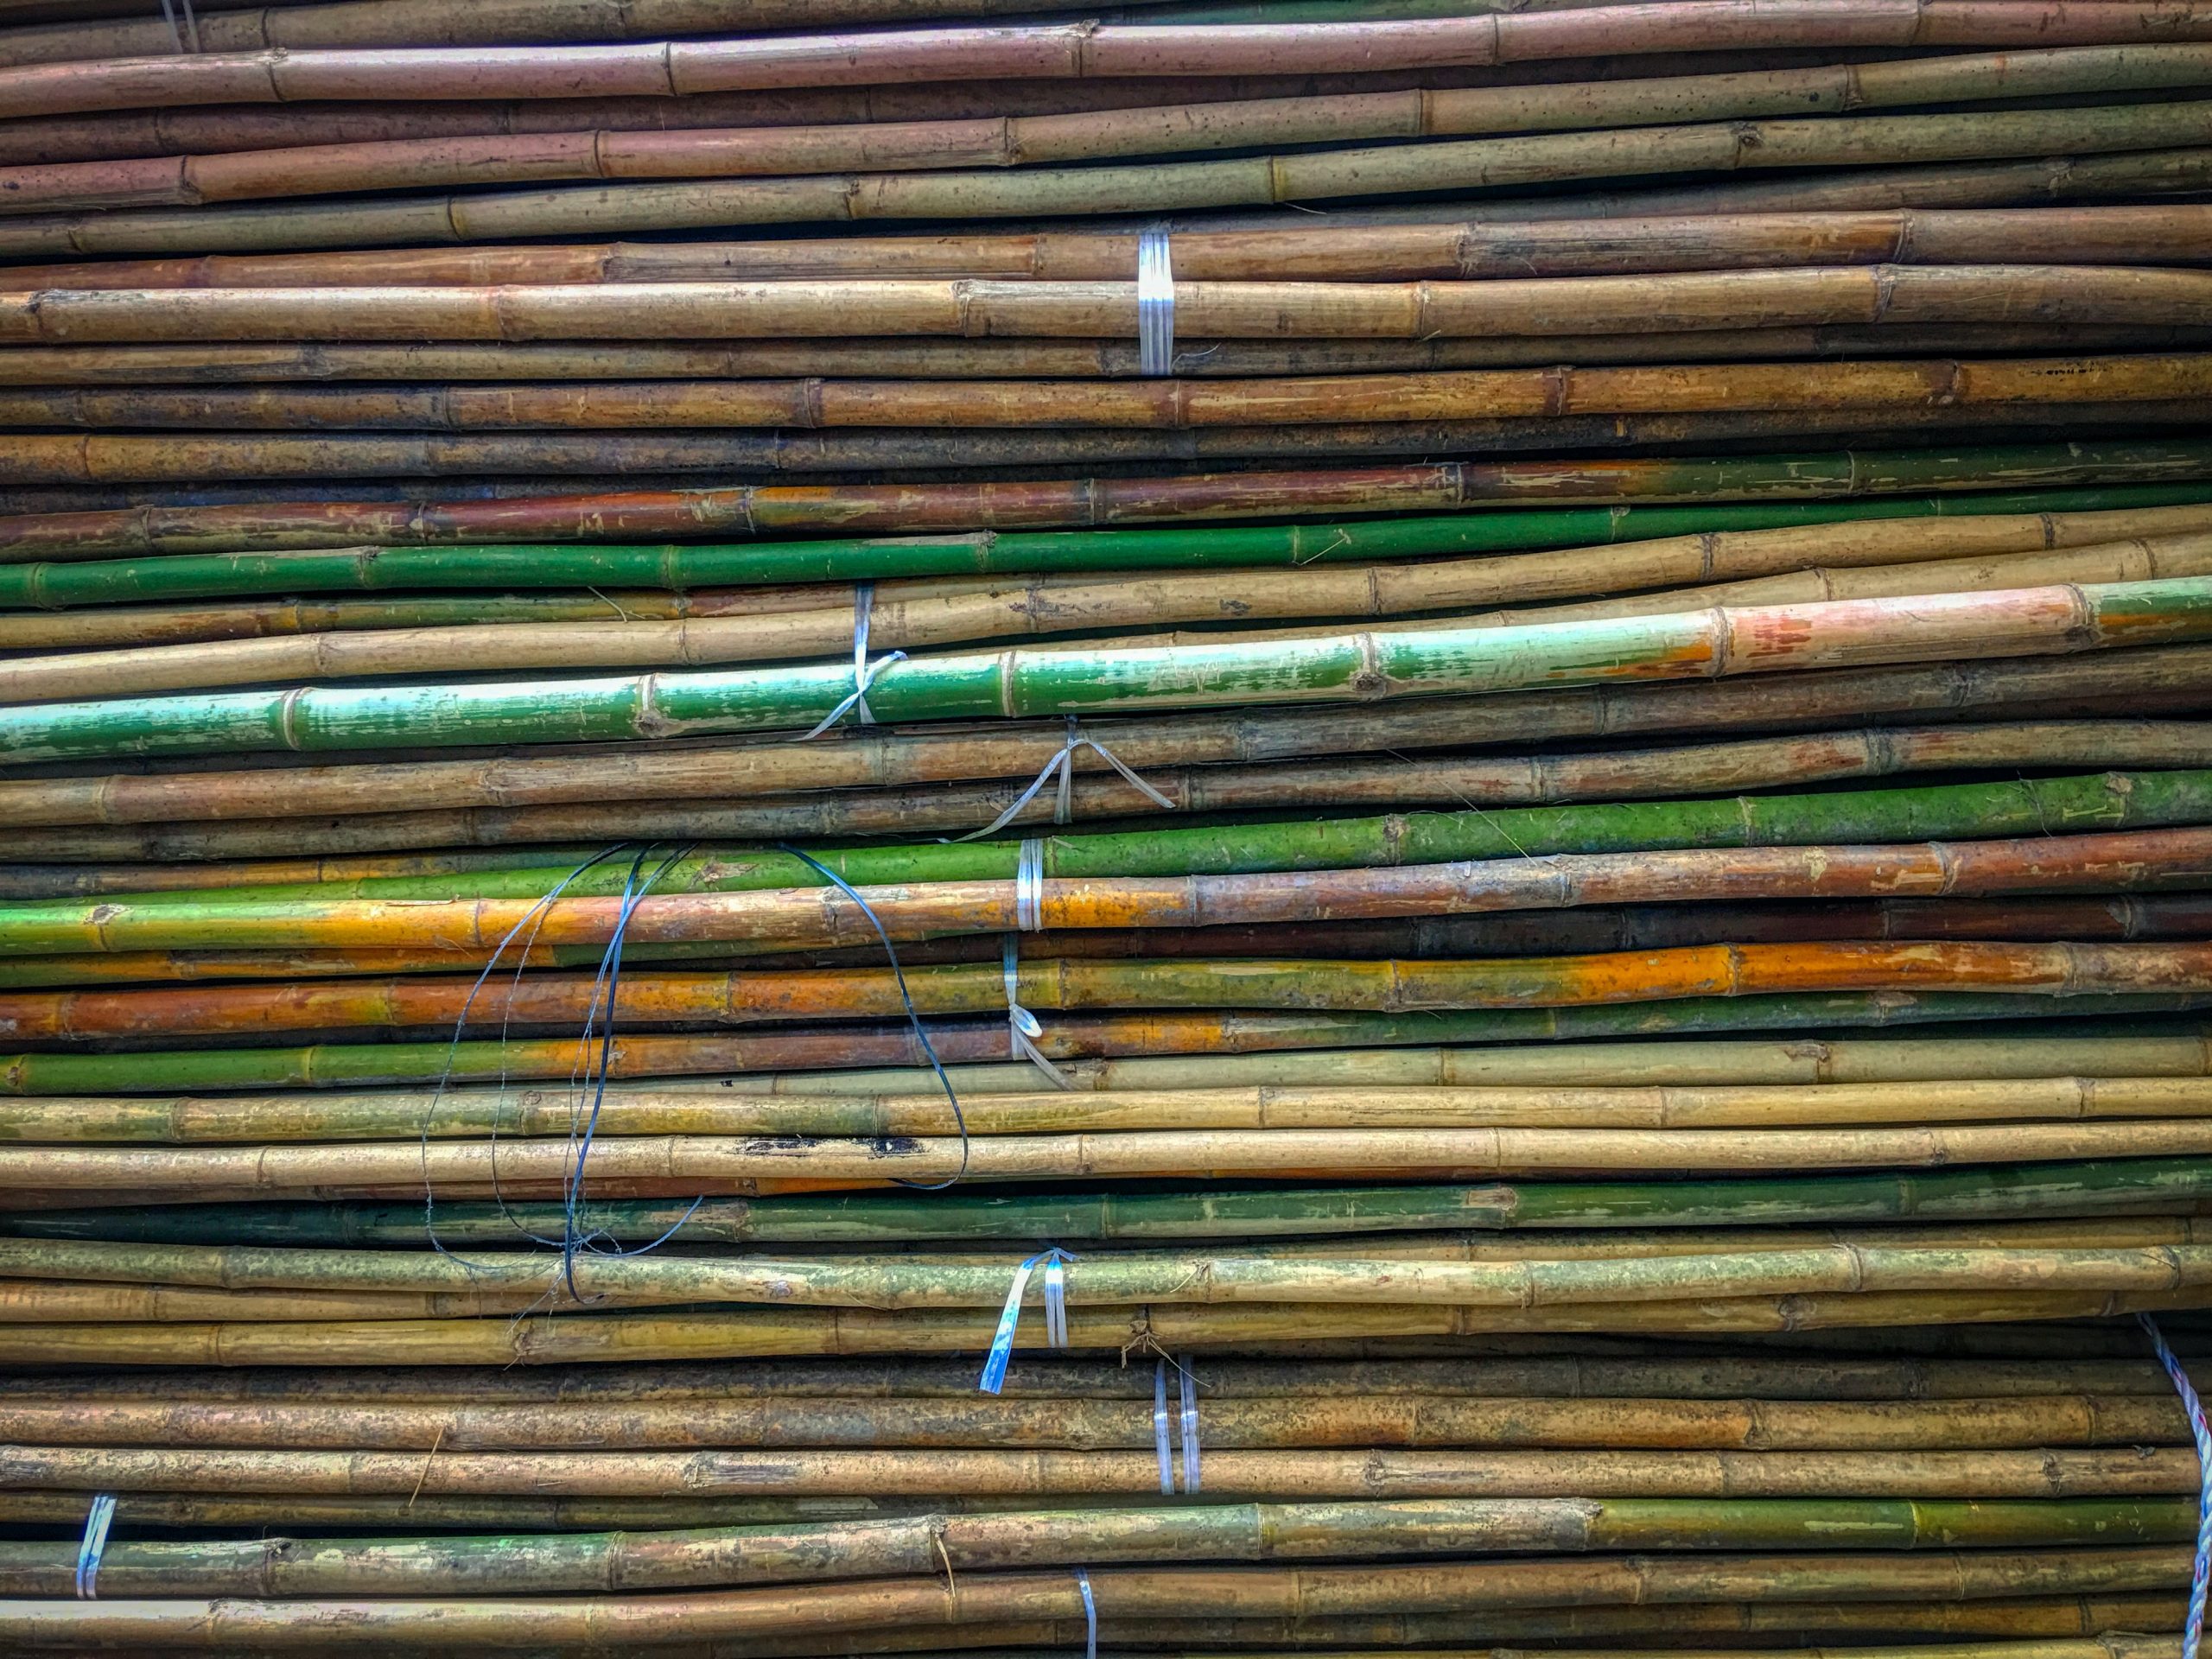 Sugar cane stacked up and bundled on top of each other